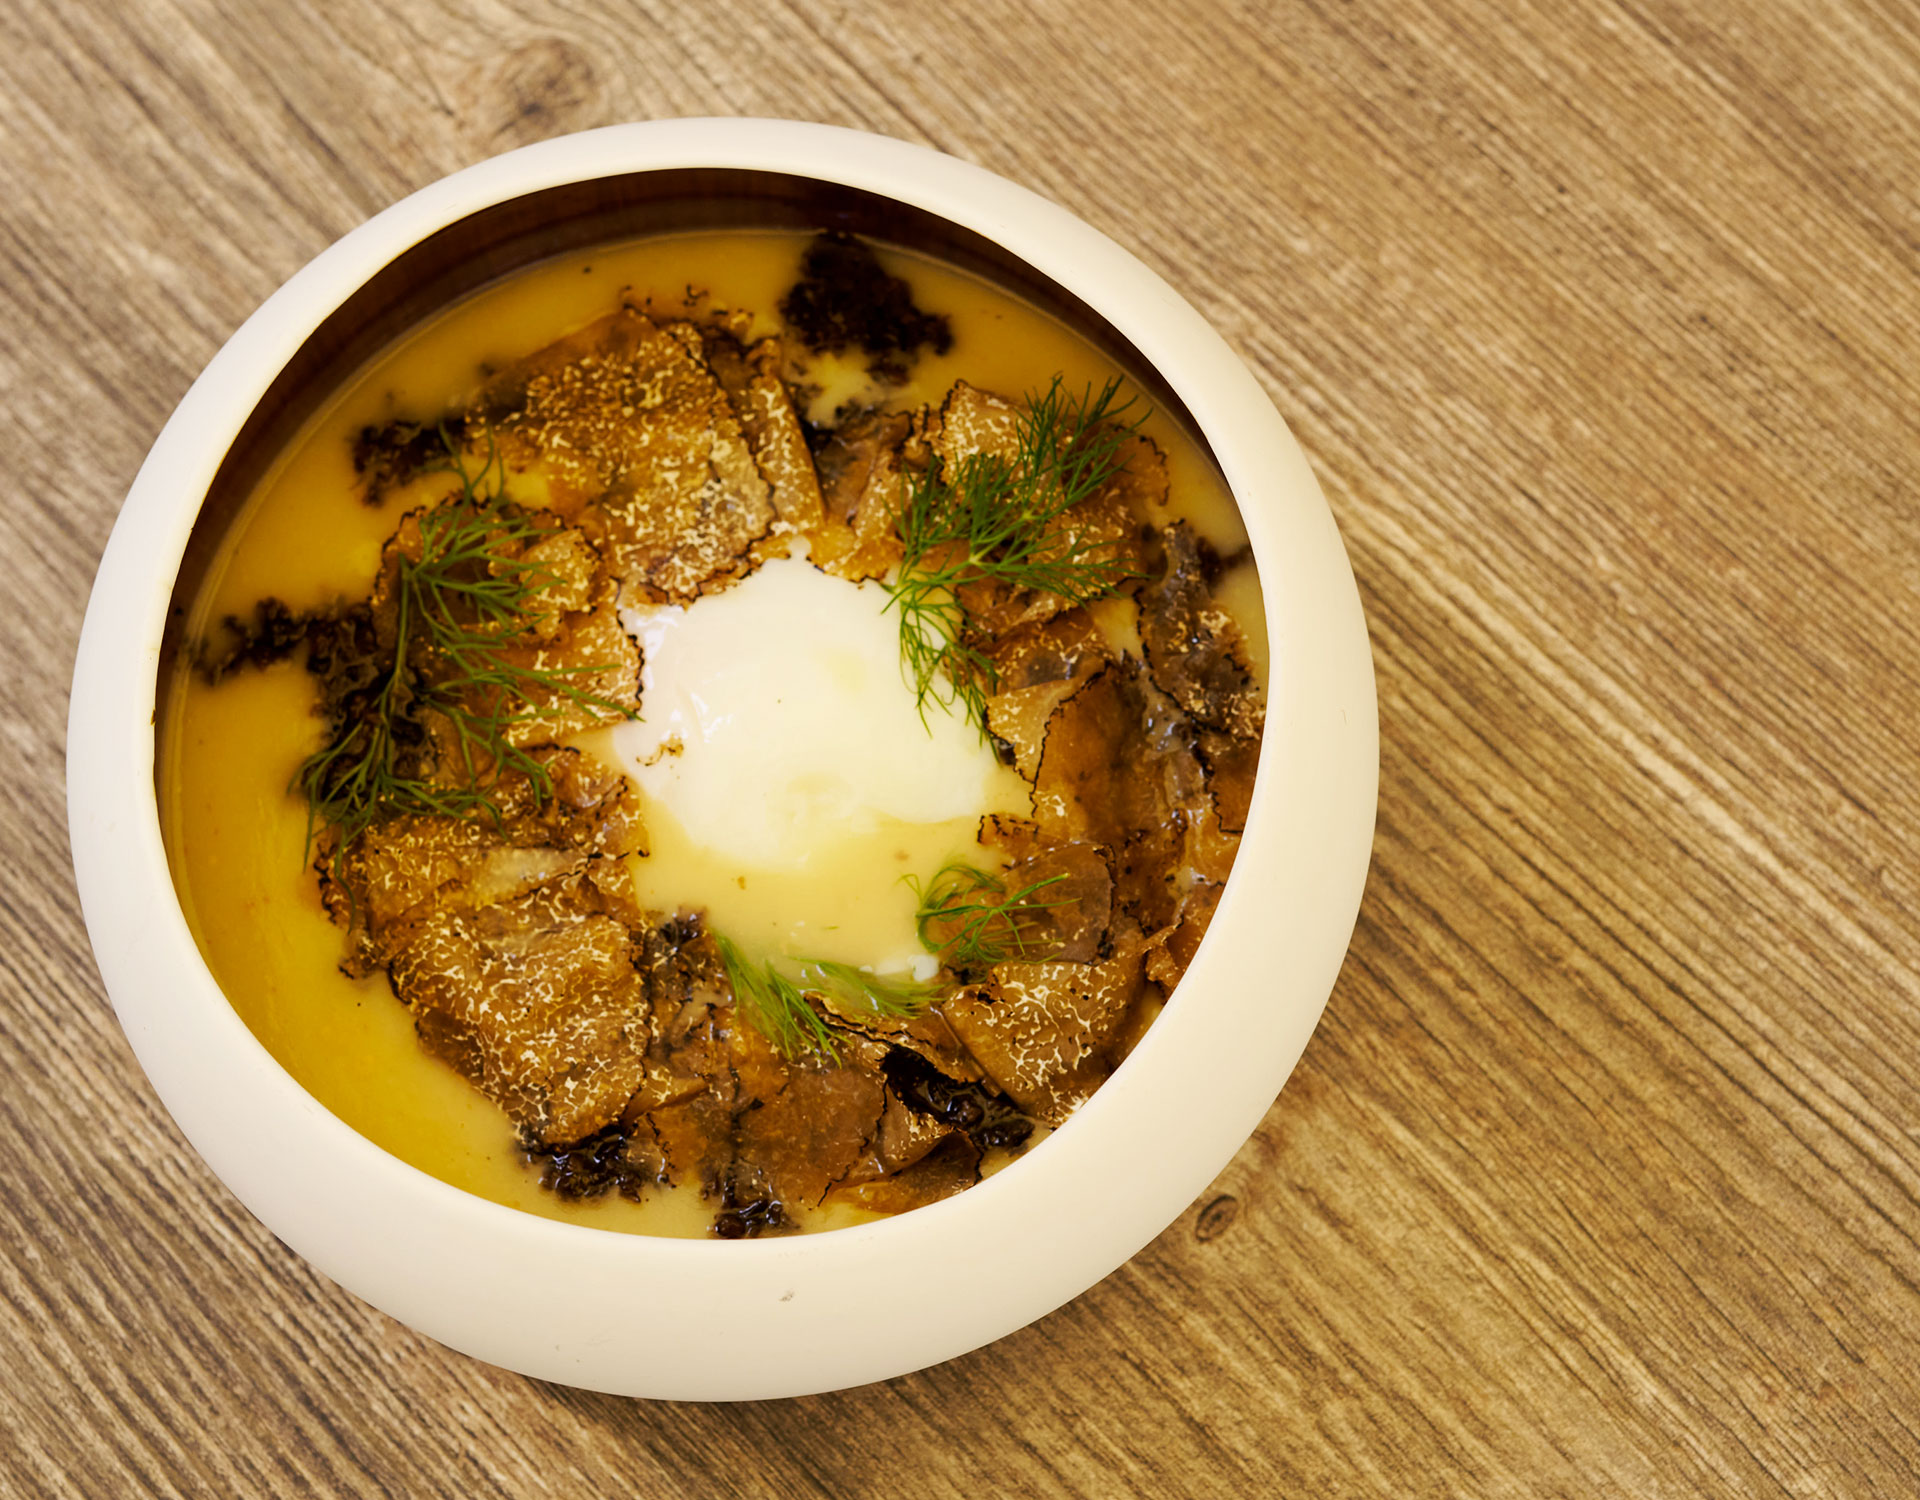 Soft egg with Truffle Sauce